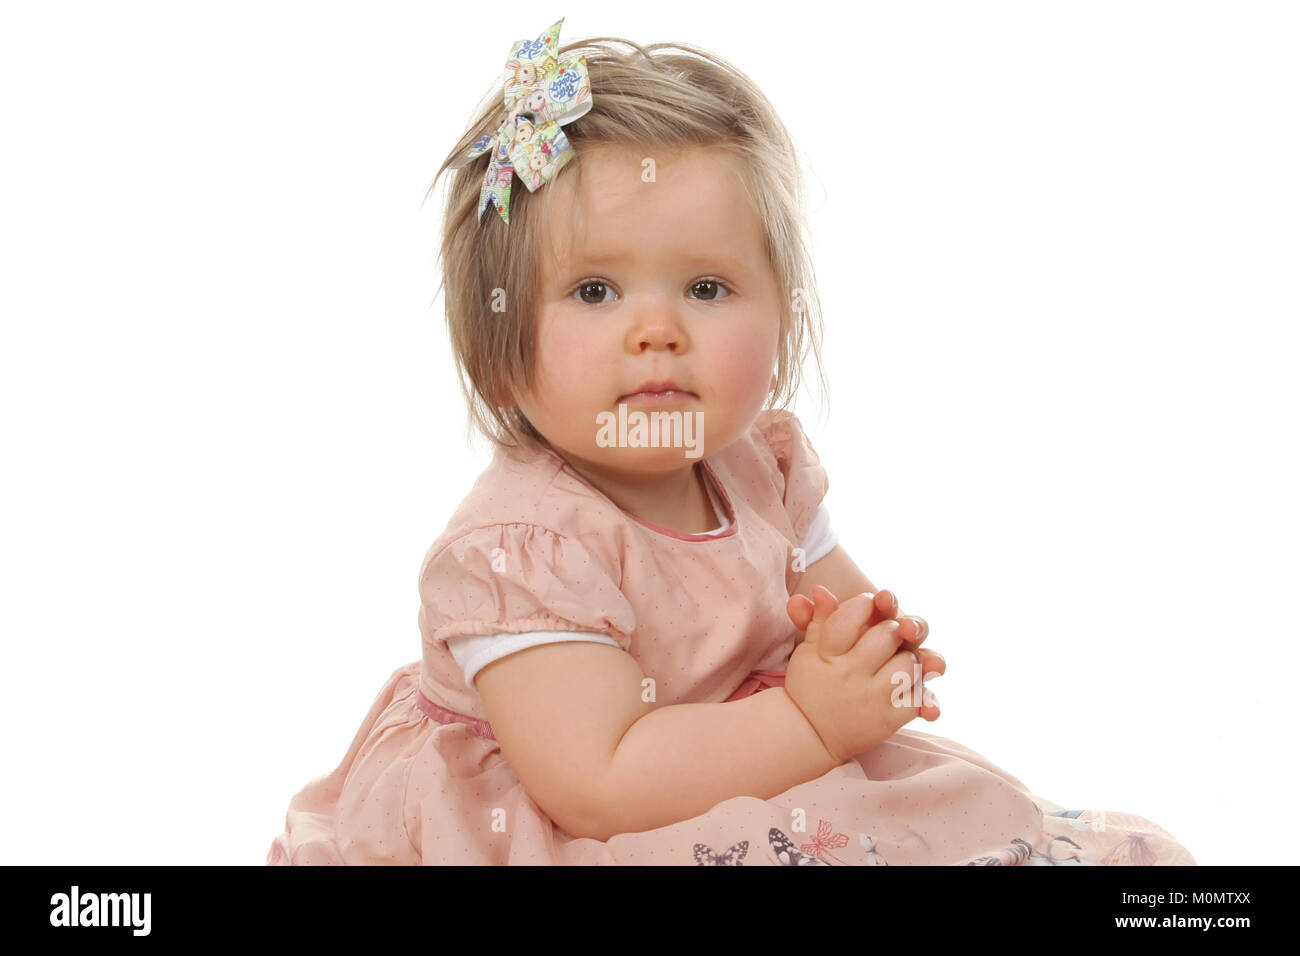 1 year old beautiful girl in pretty dress, child development, personal and social skills Stock Photo